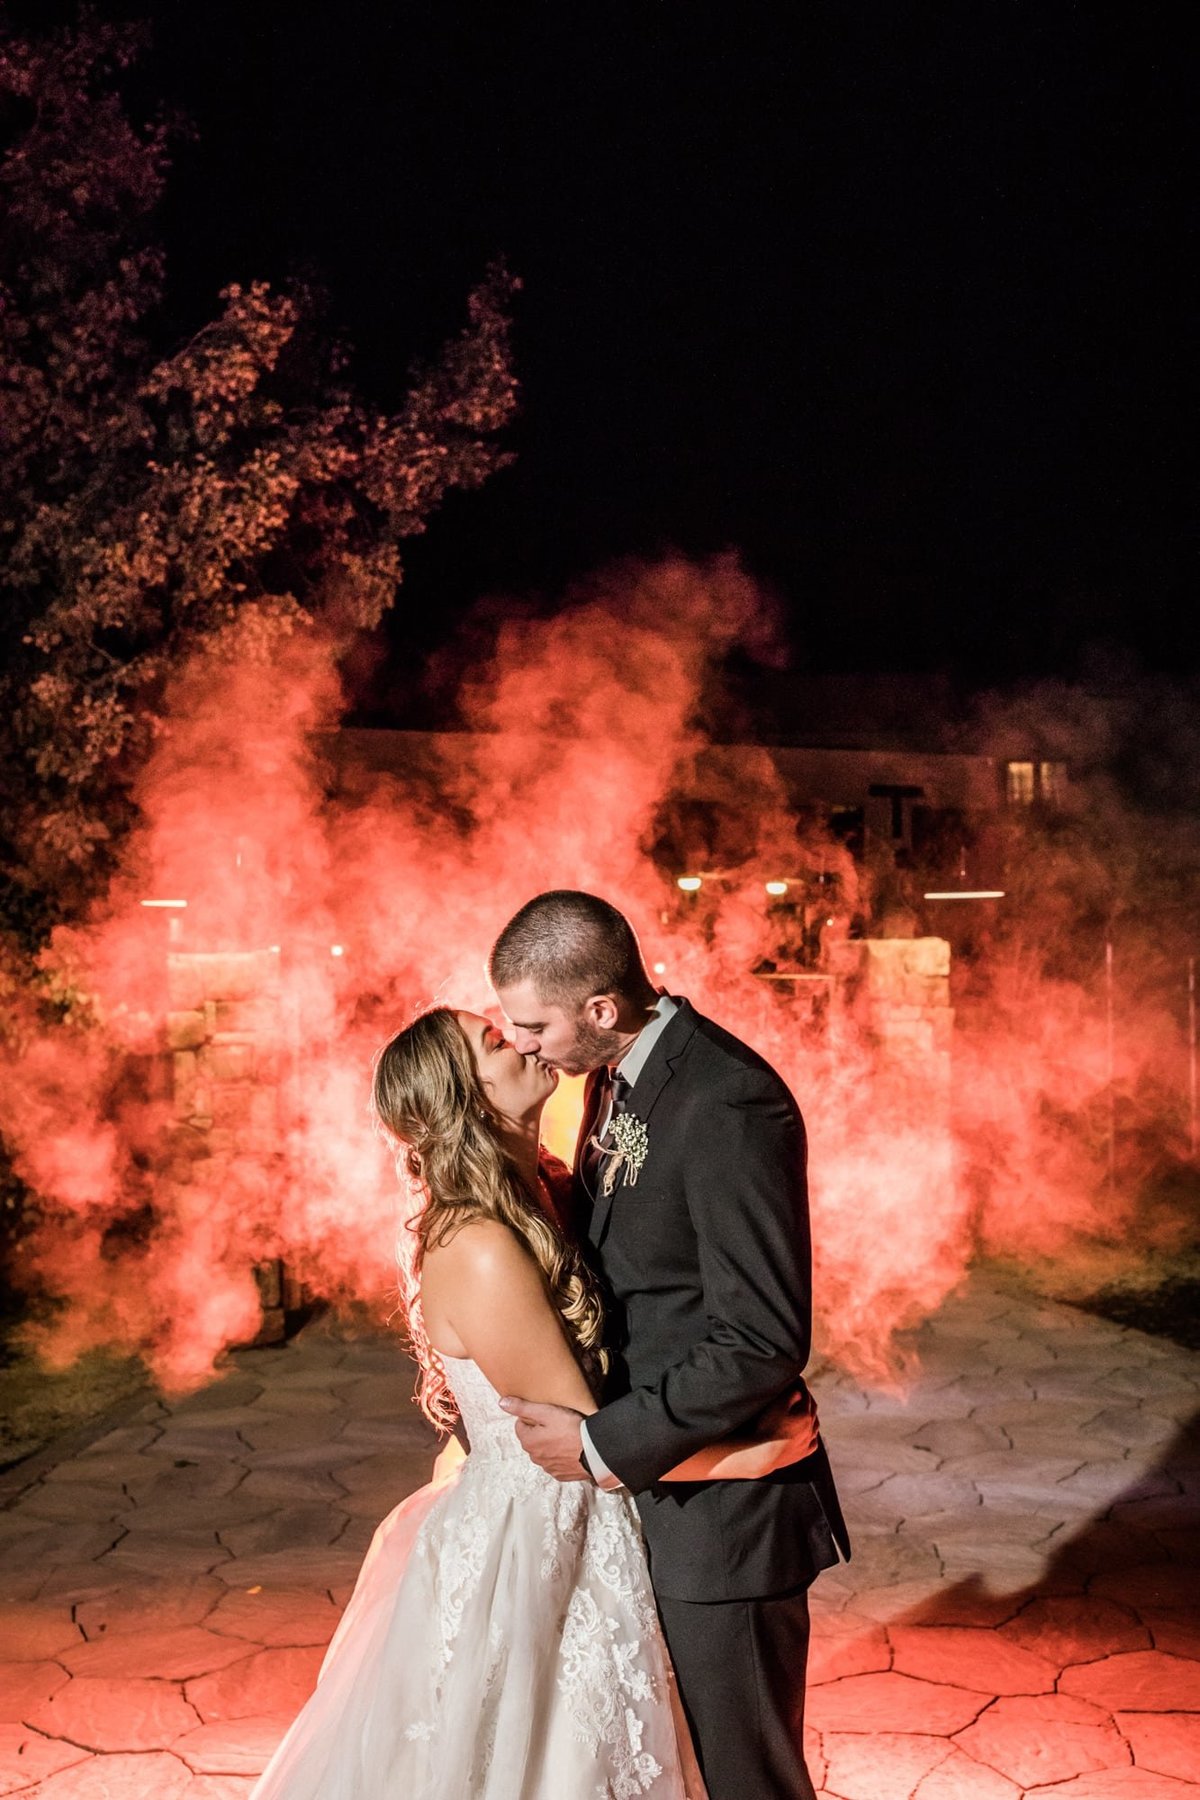 Bride and Groom share a romantic kiss with a red hue mist in the background